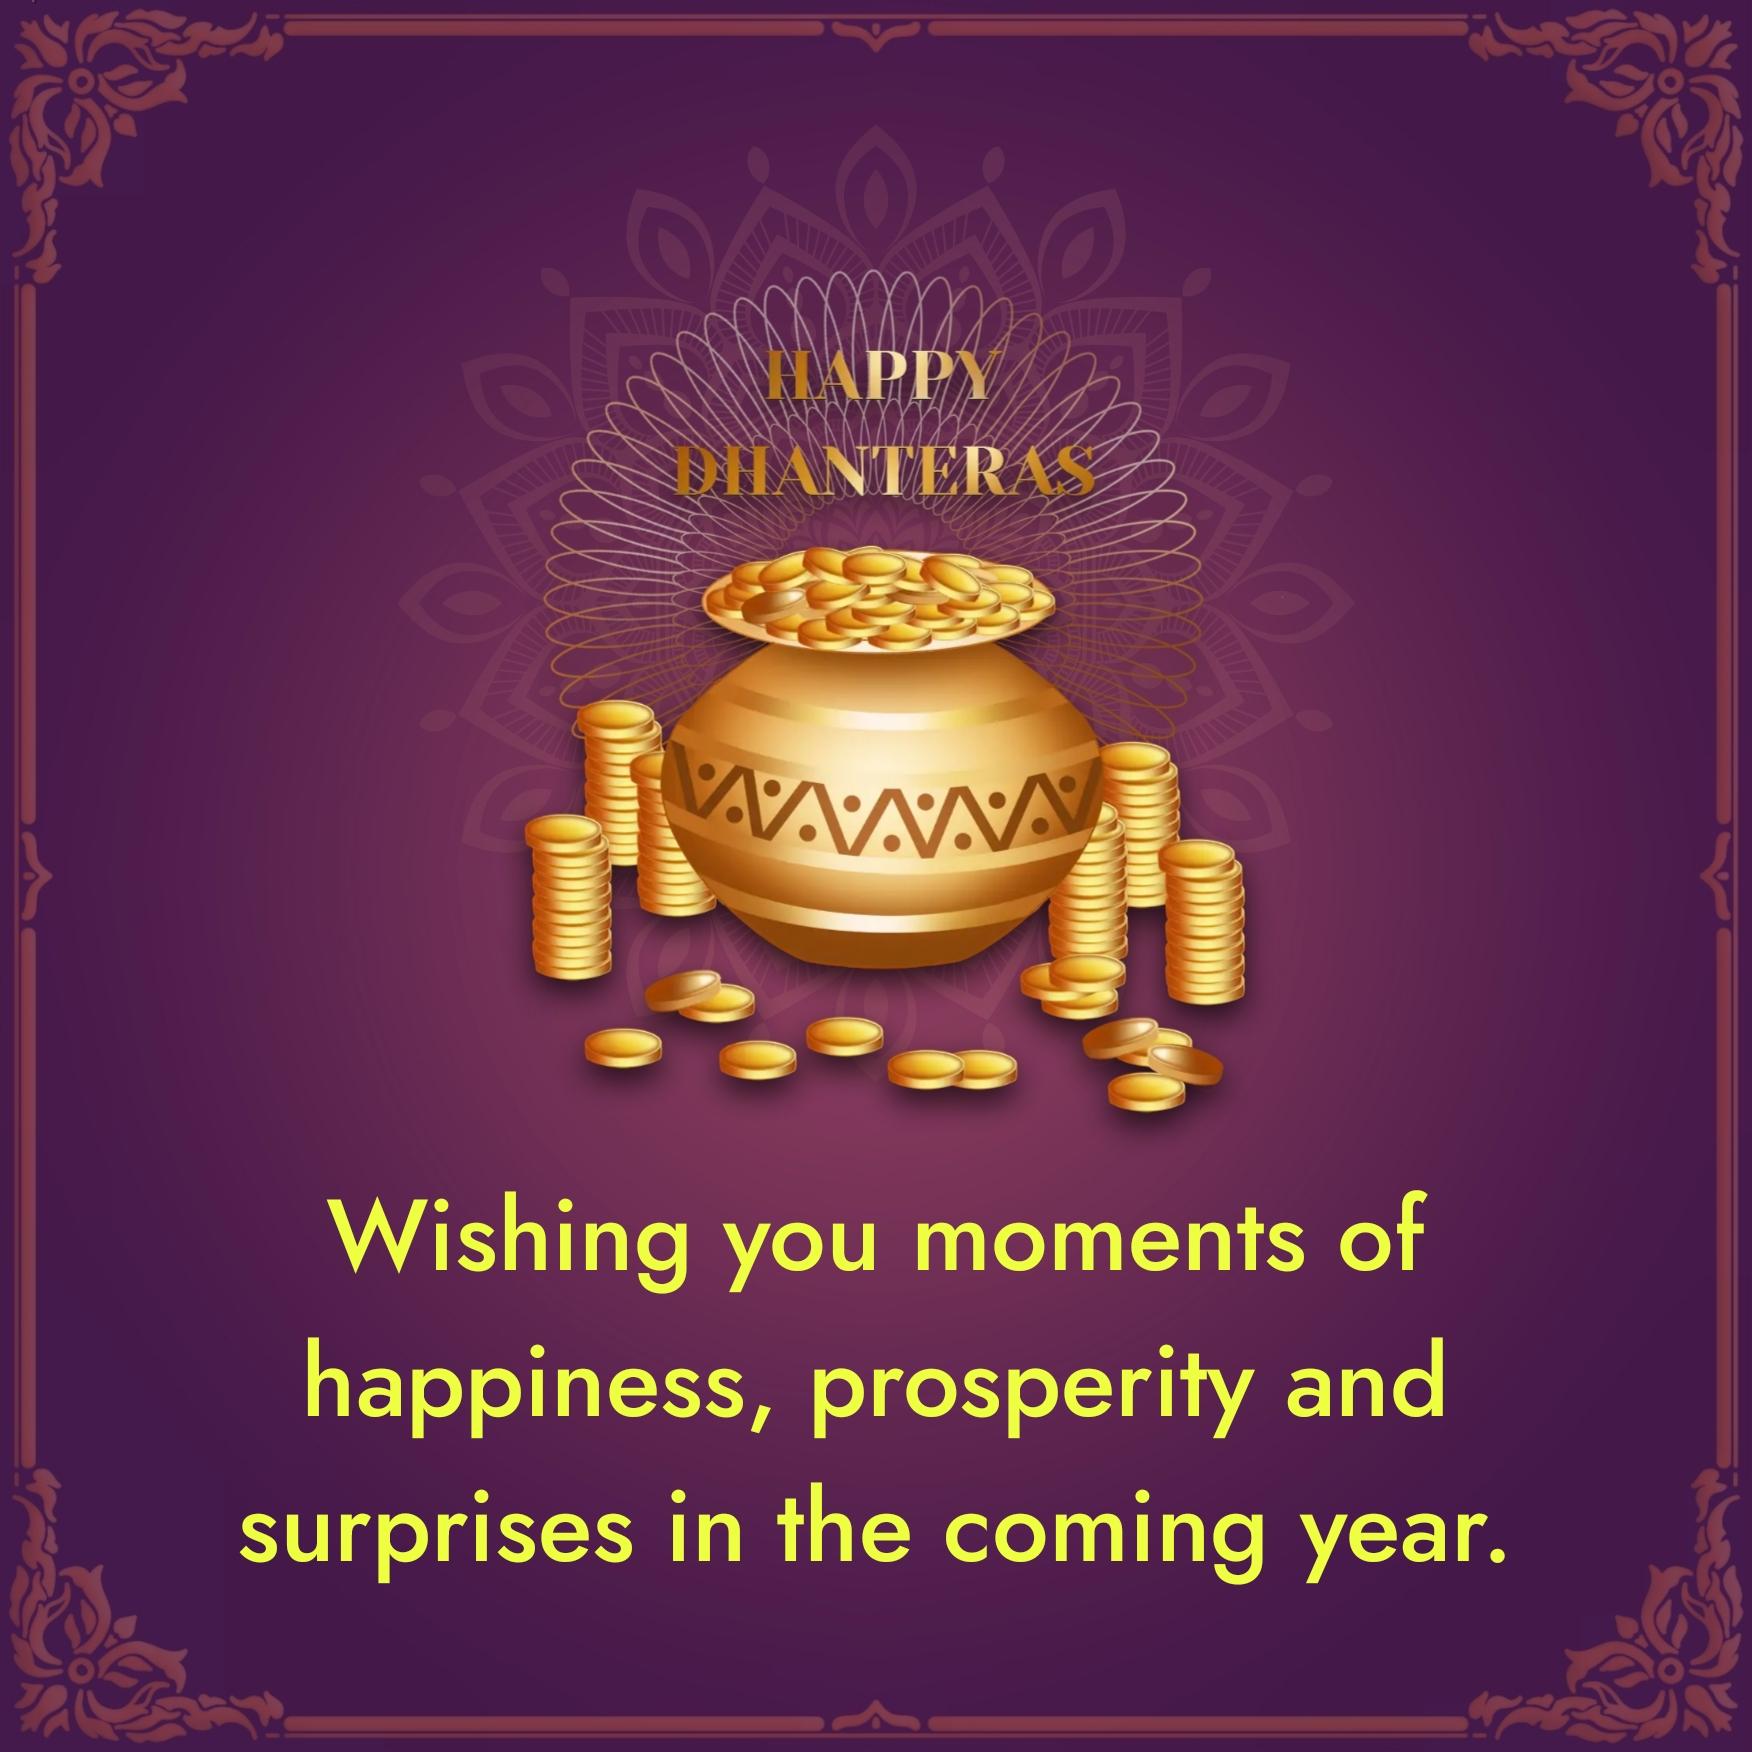 Wishing you moments of happiness prosperity and surprises